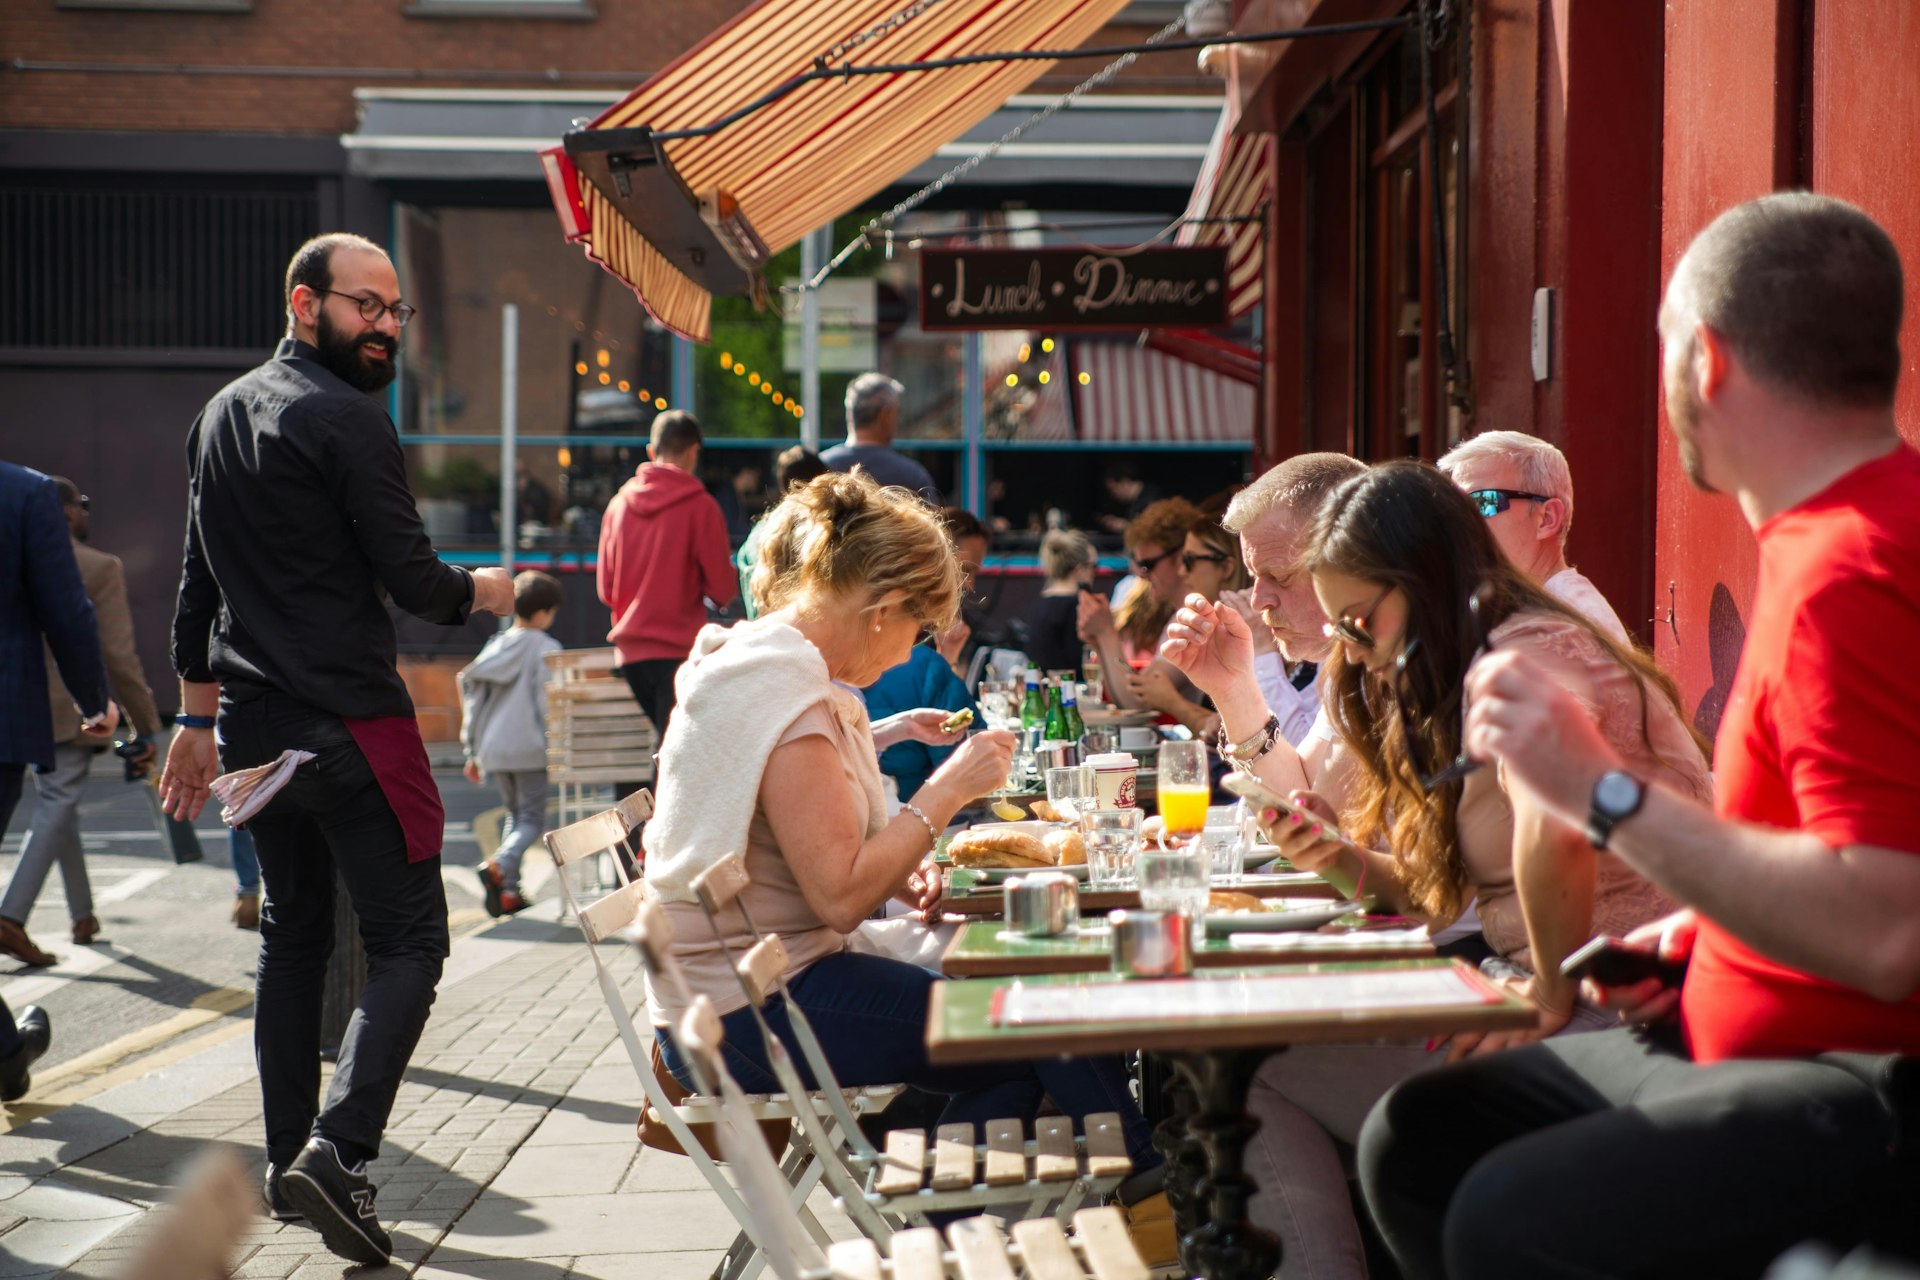 Diners eat at tables outside a restaurant as a member of waiting staff walks by them smiling